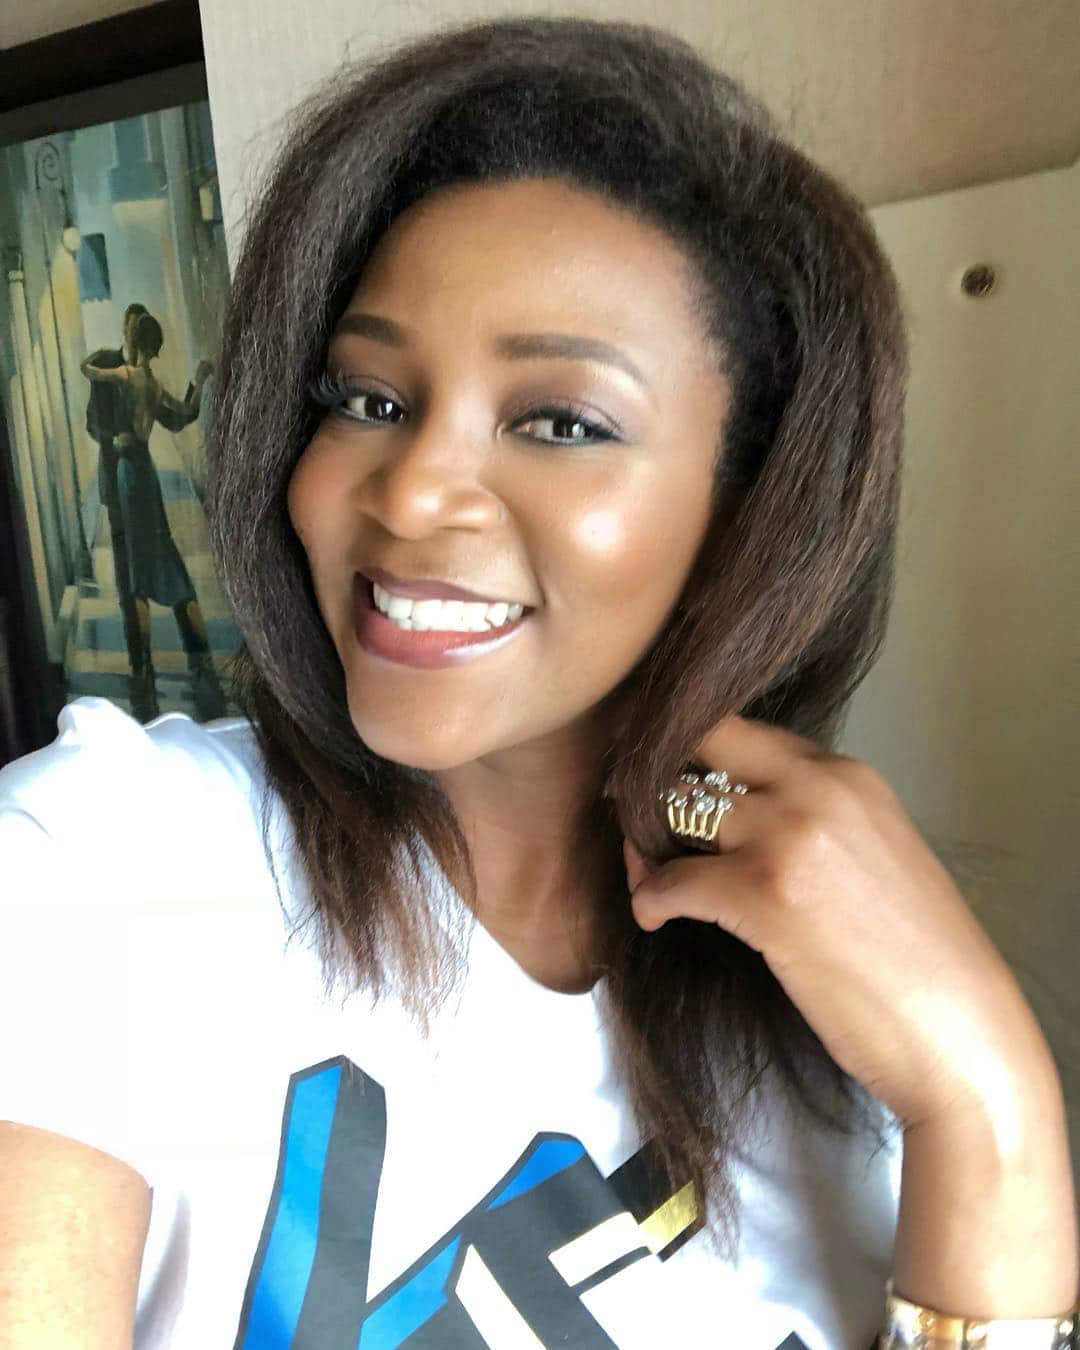 Before and after pictures of Genevieve Nnaji as she marks her 39th birthday